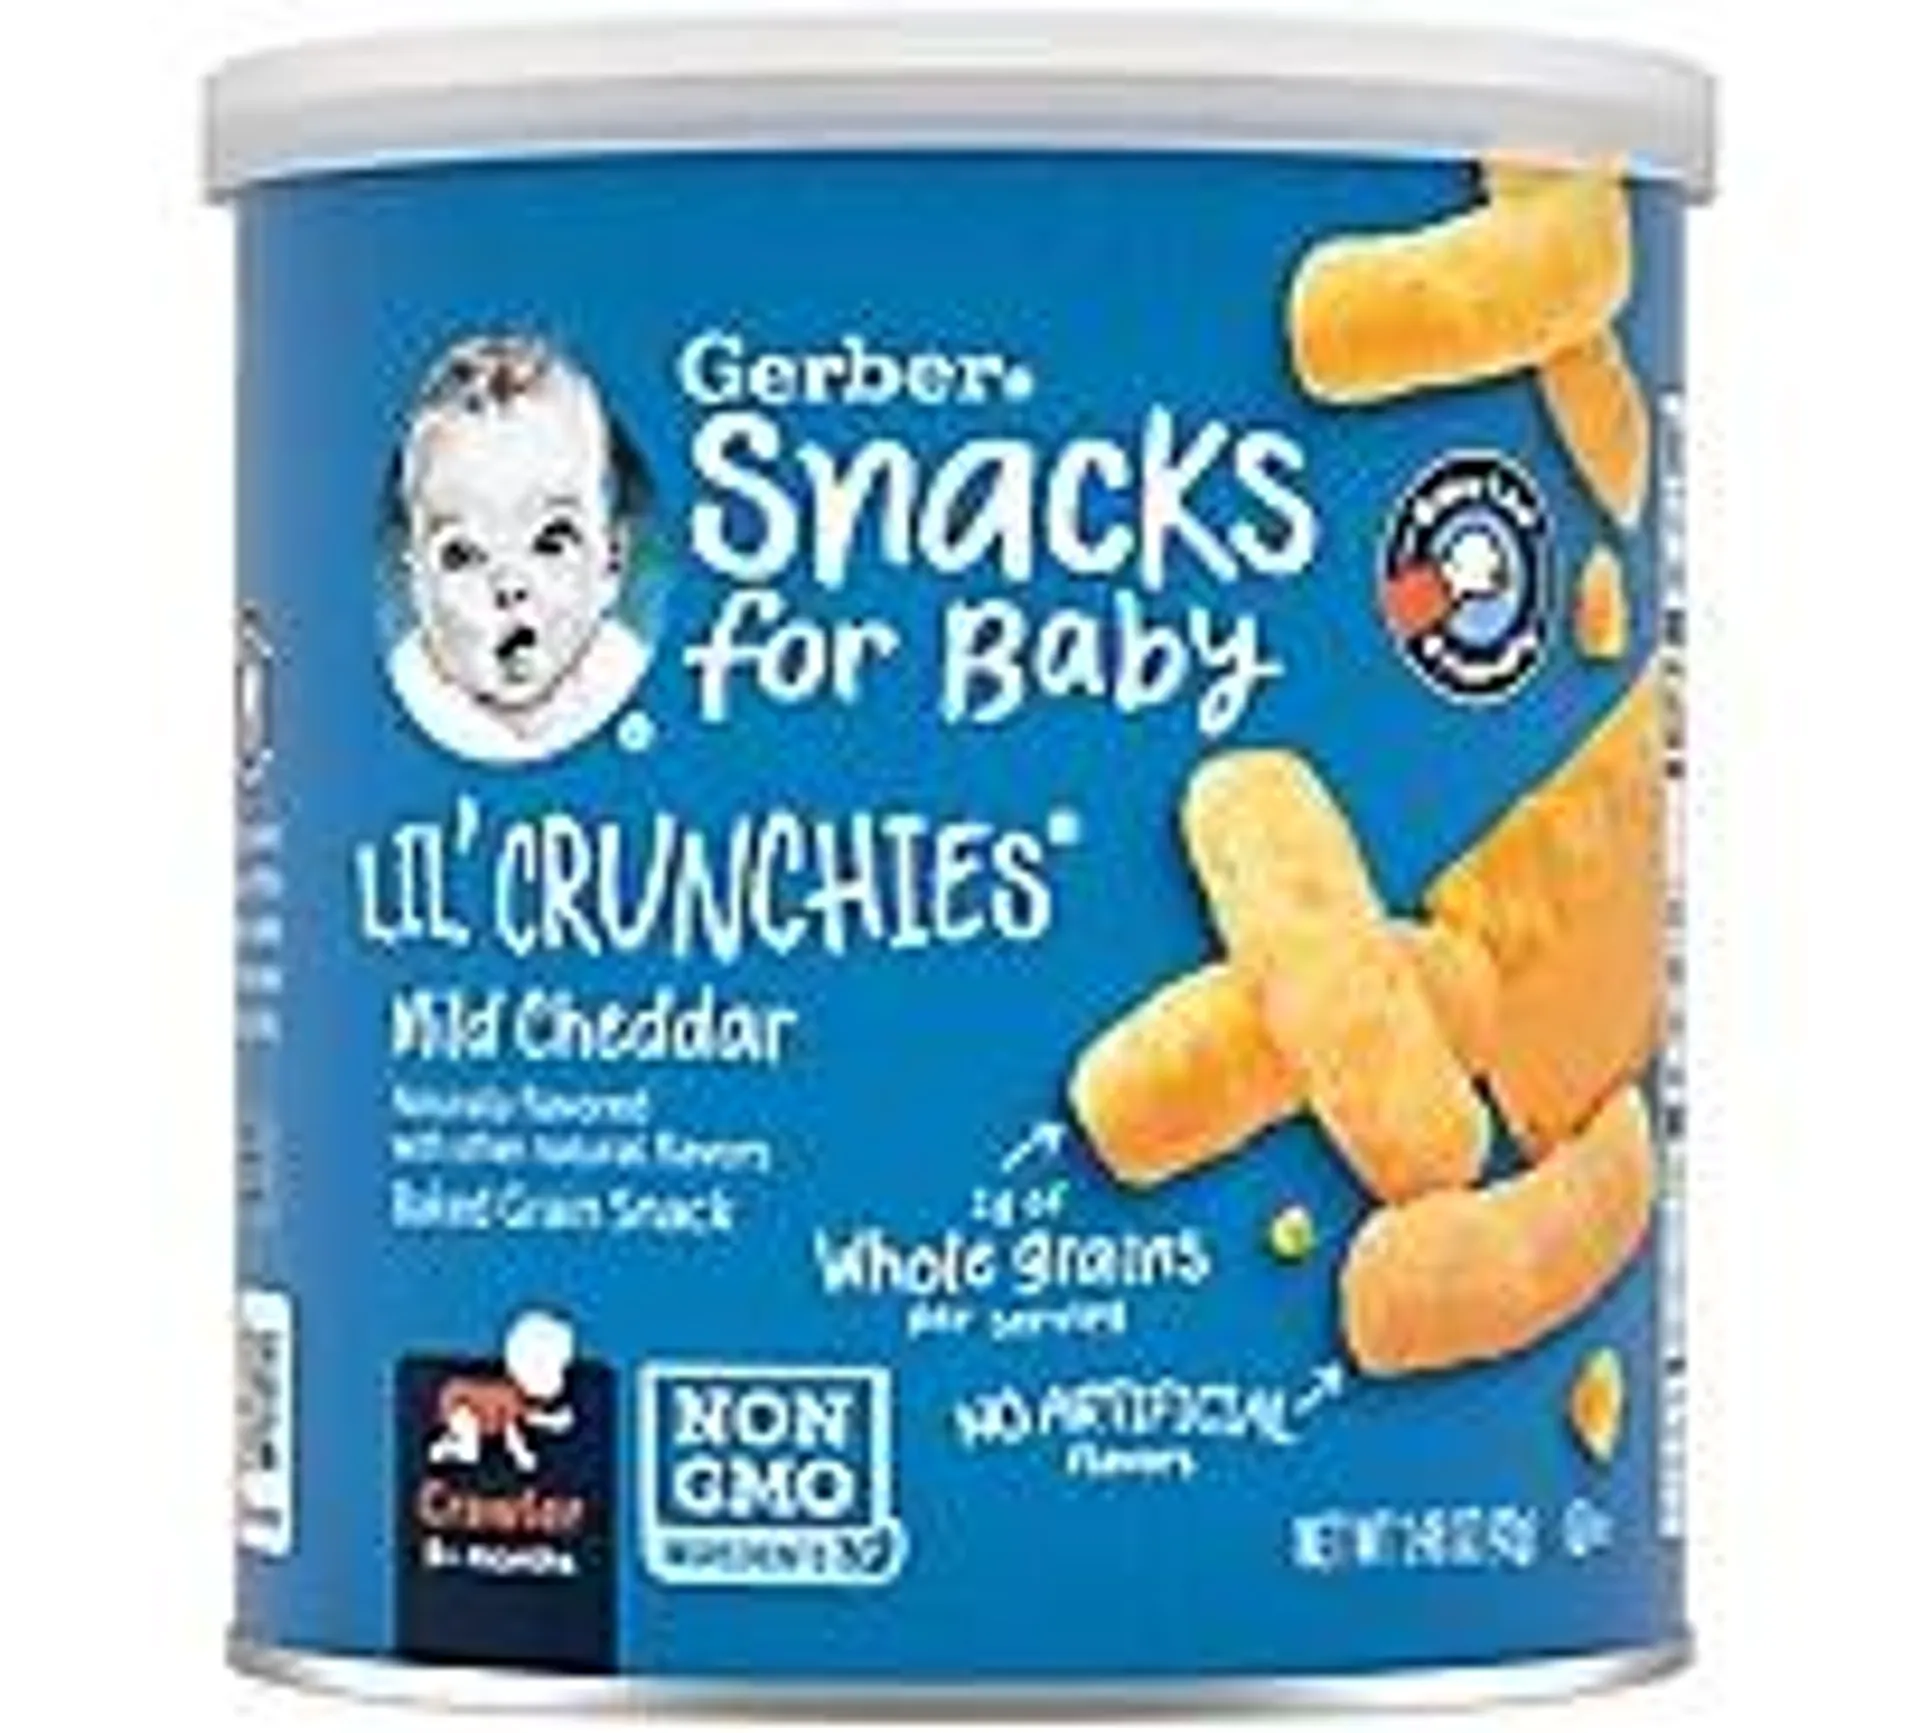 Gerber Lil Crunchies Mild Ched... r for Baby - 1.48 Oz